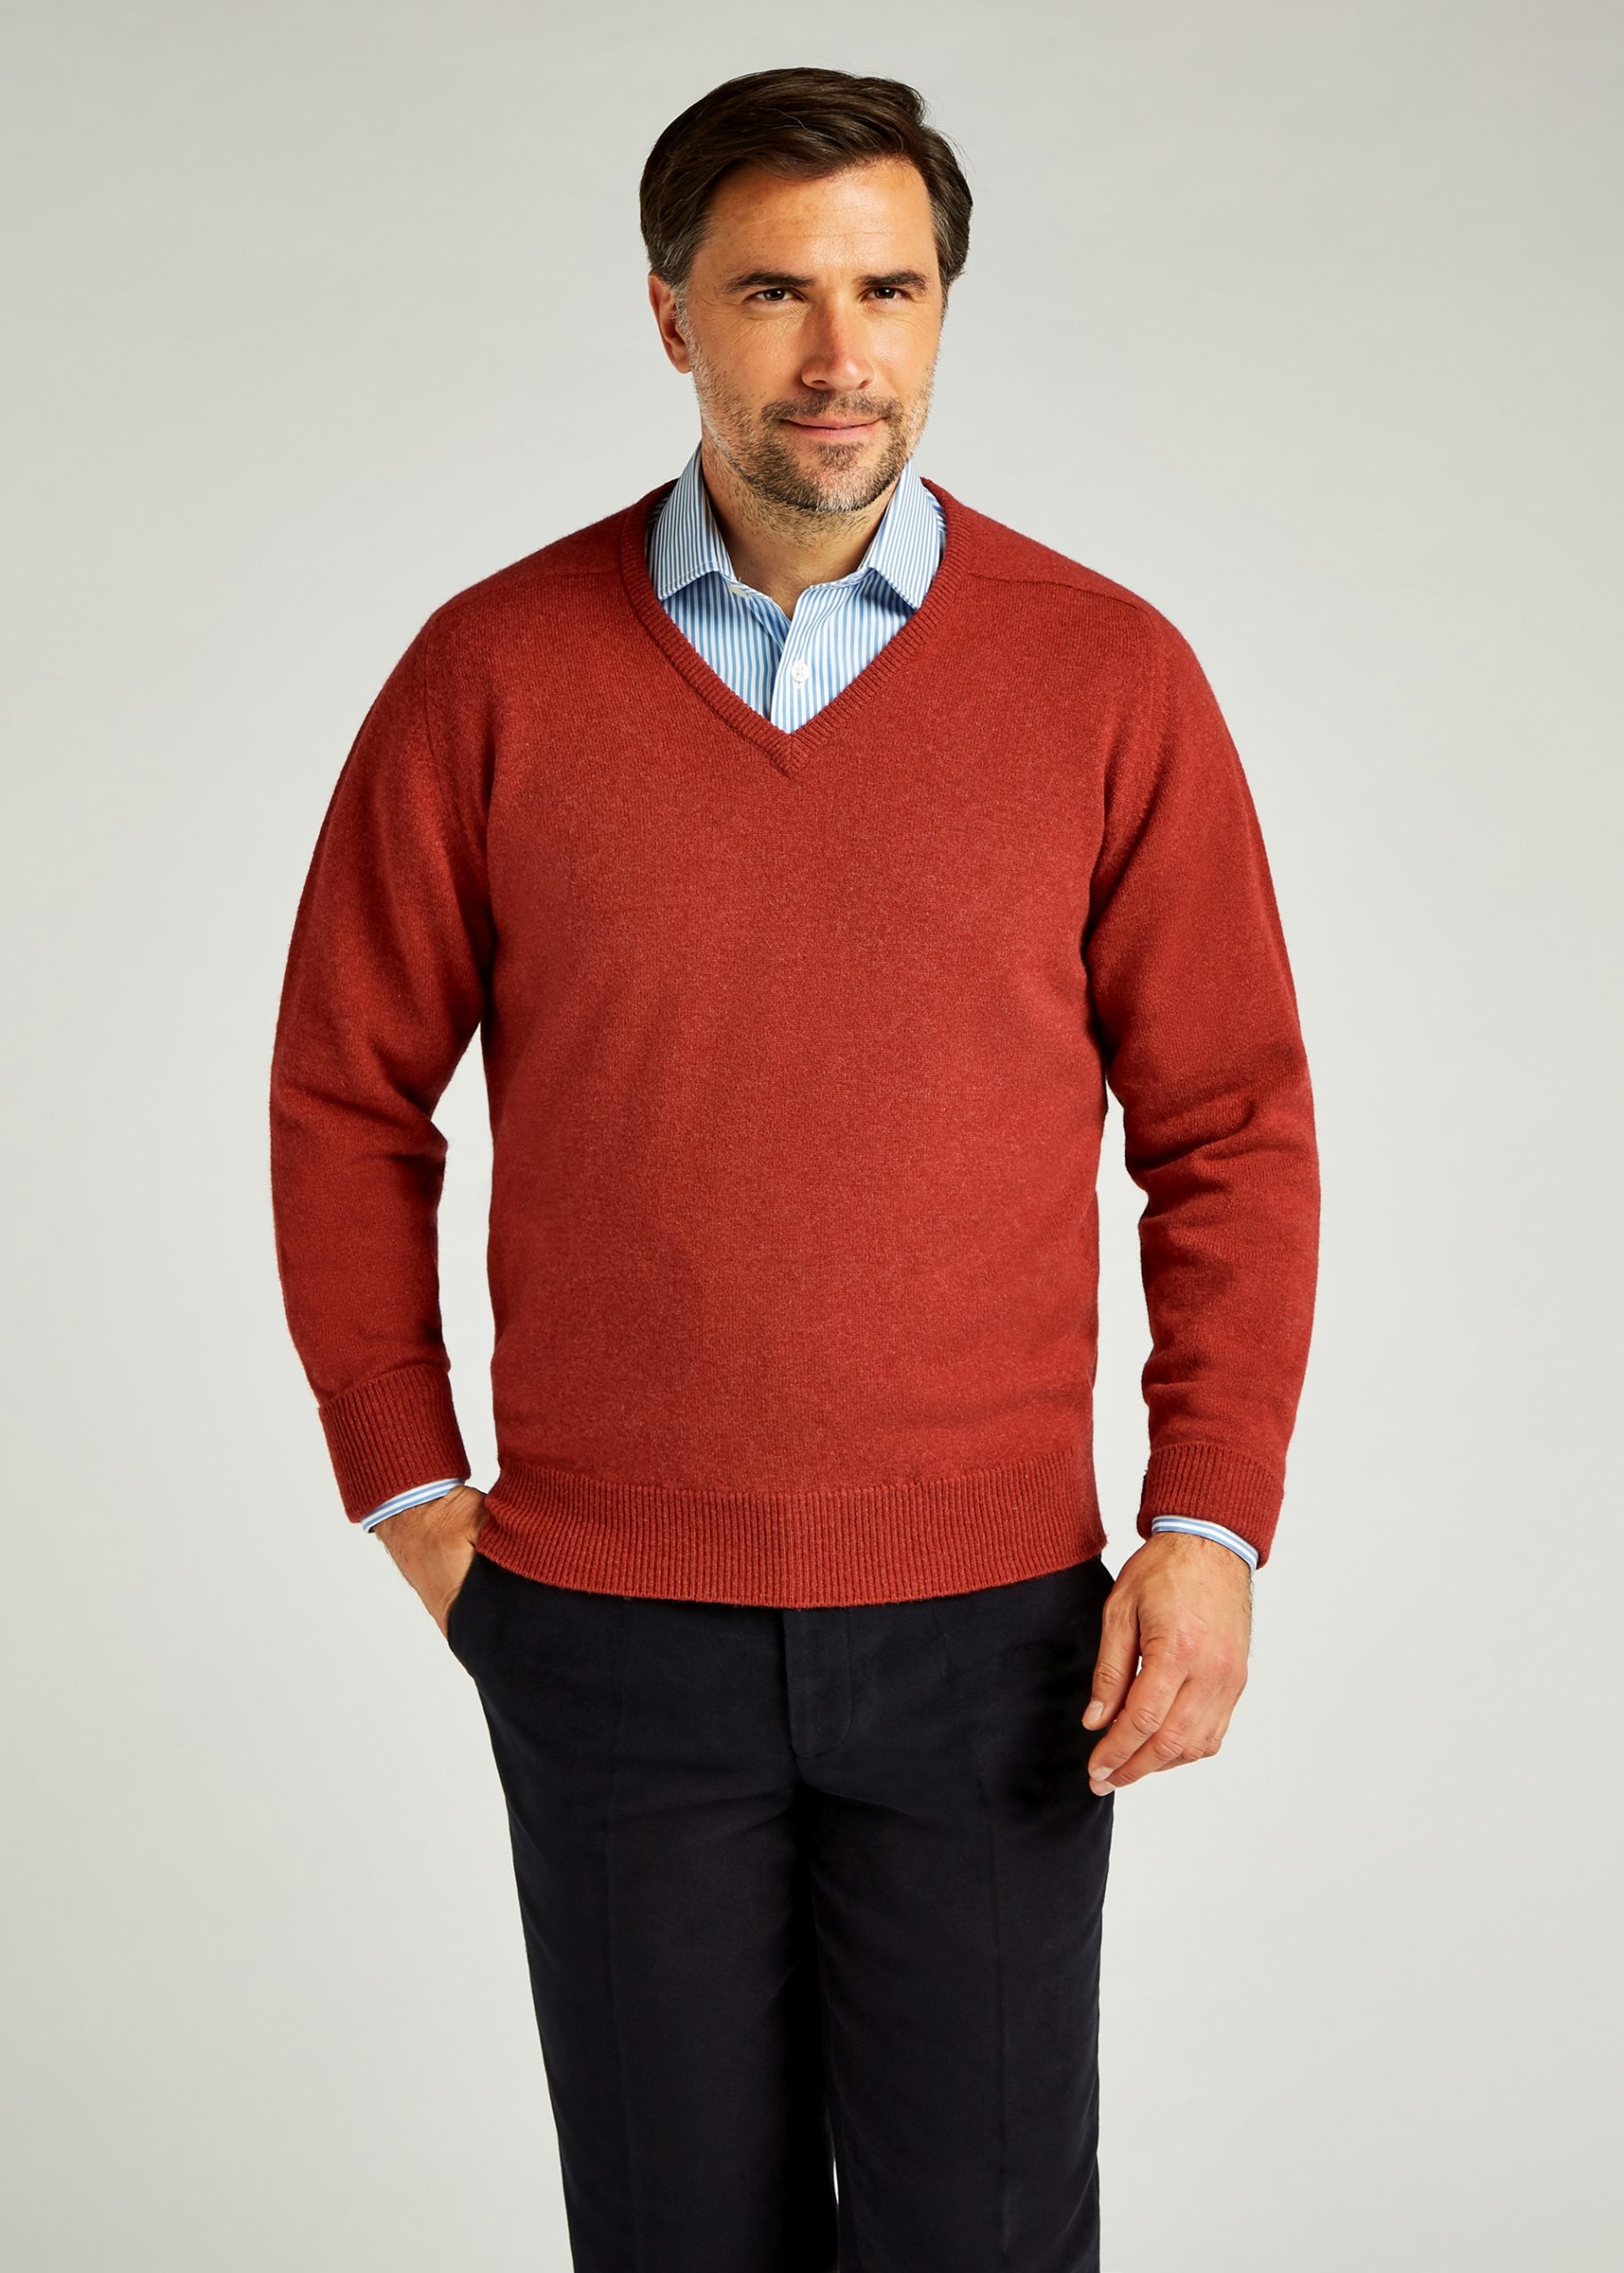 V neck poppy sweater styled with open collar shirt